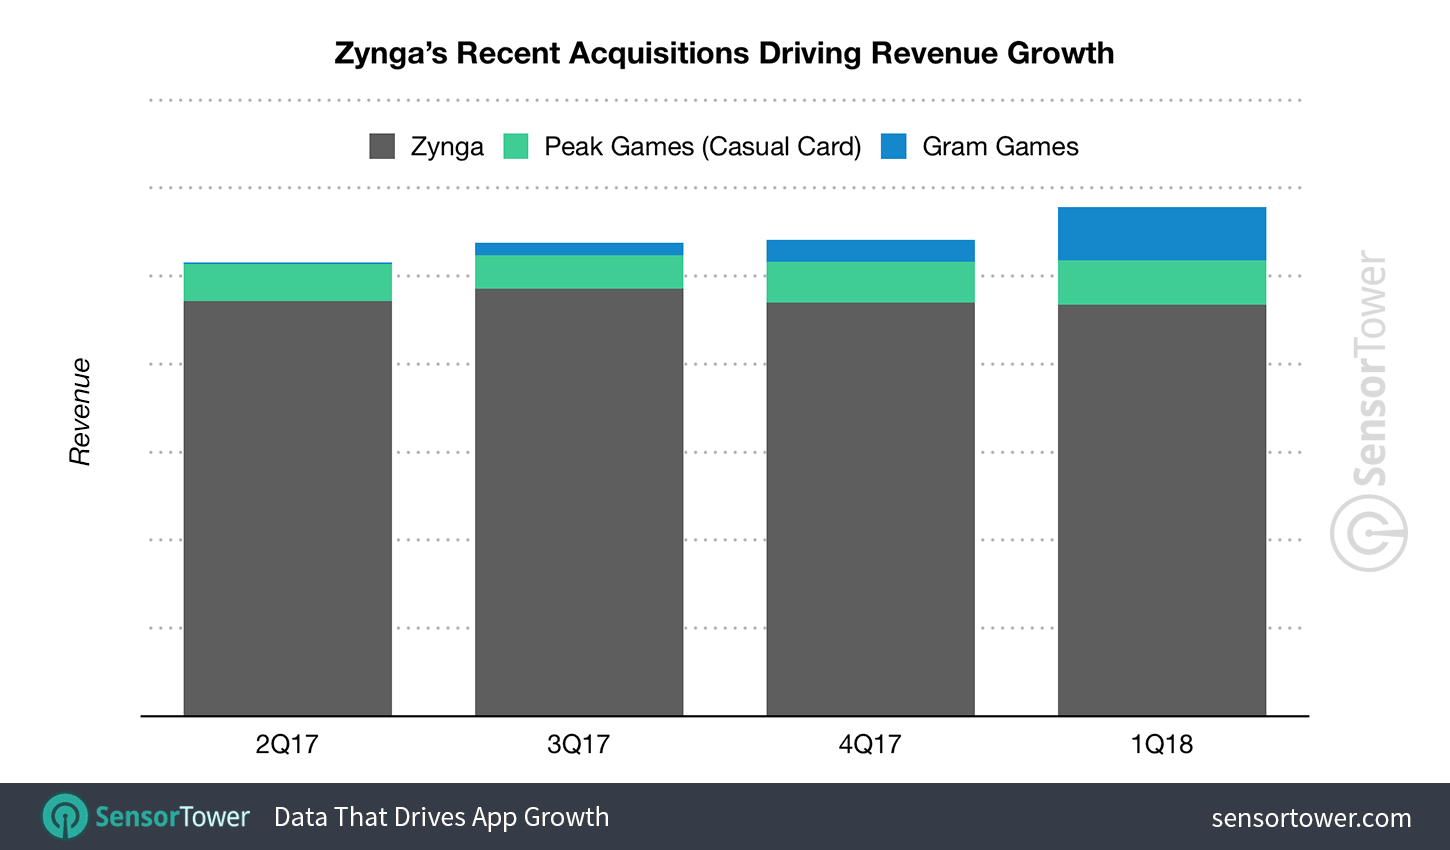 Chart showing Zynga's revenue for the past four quarters with Gram Games and Peak Games revenue added